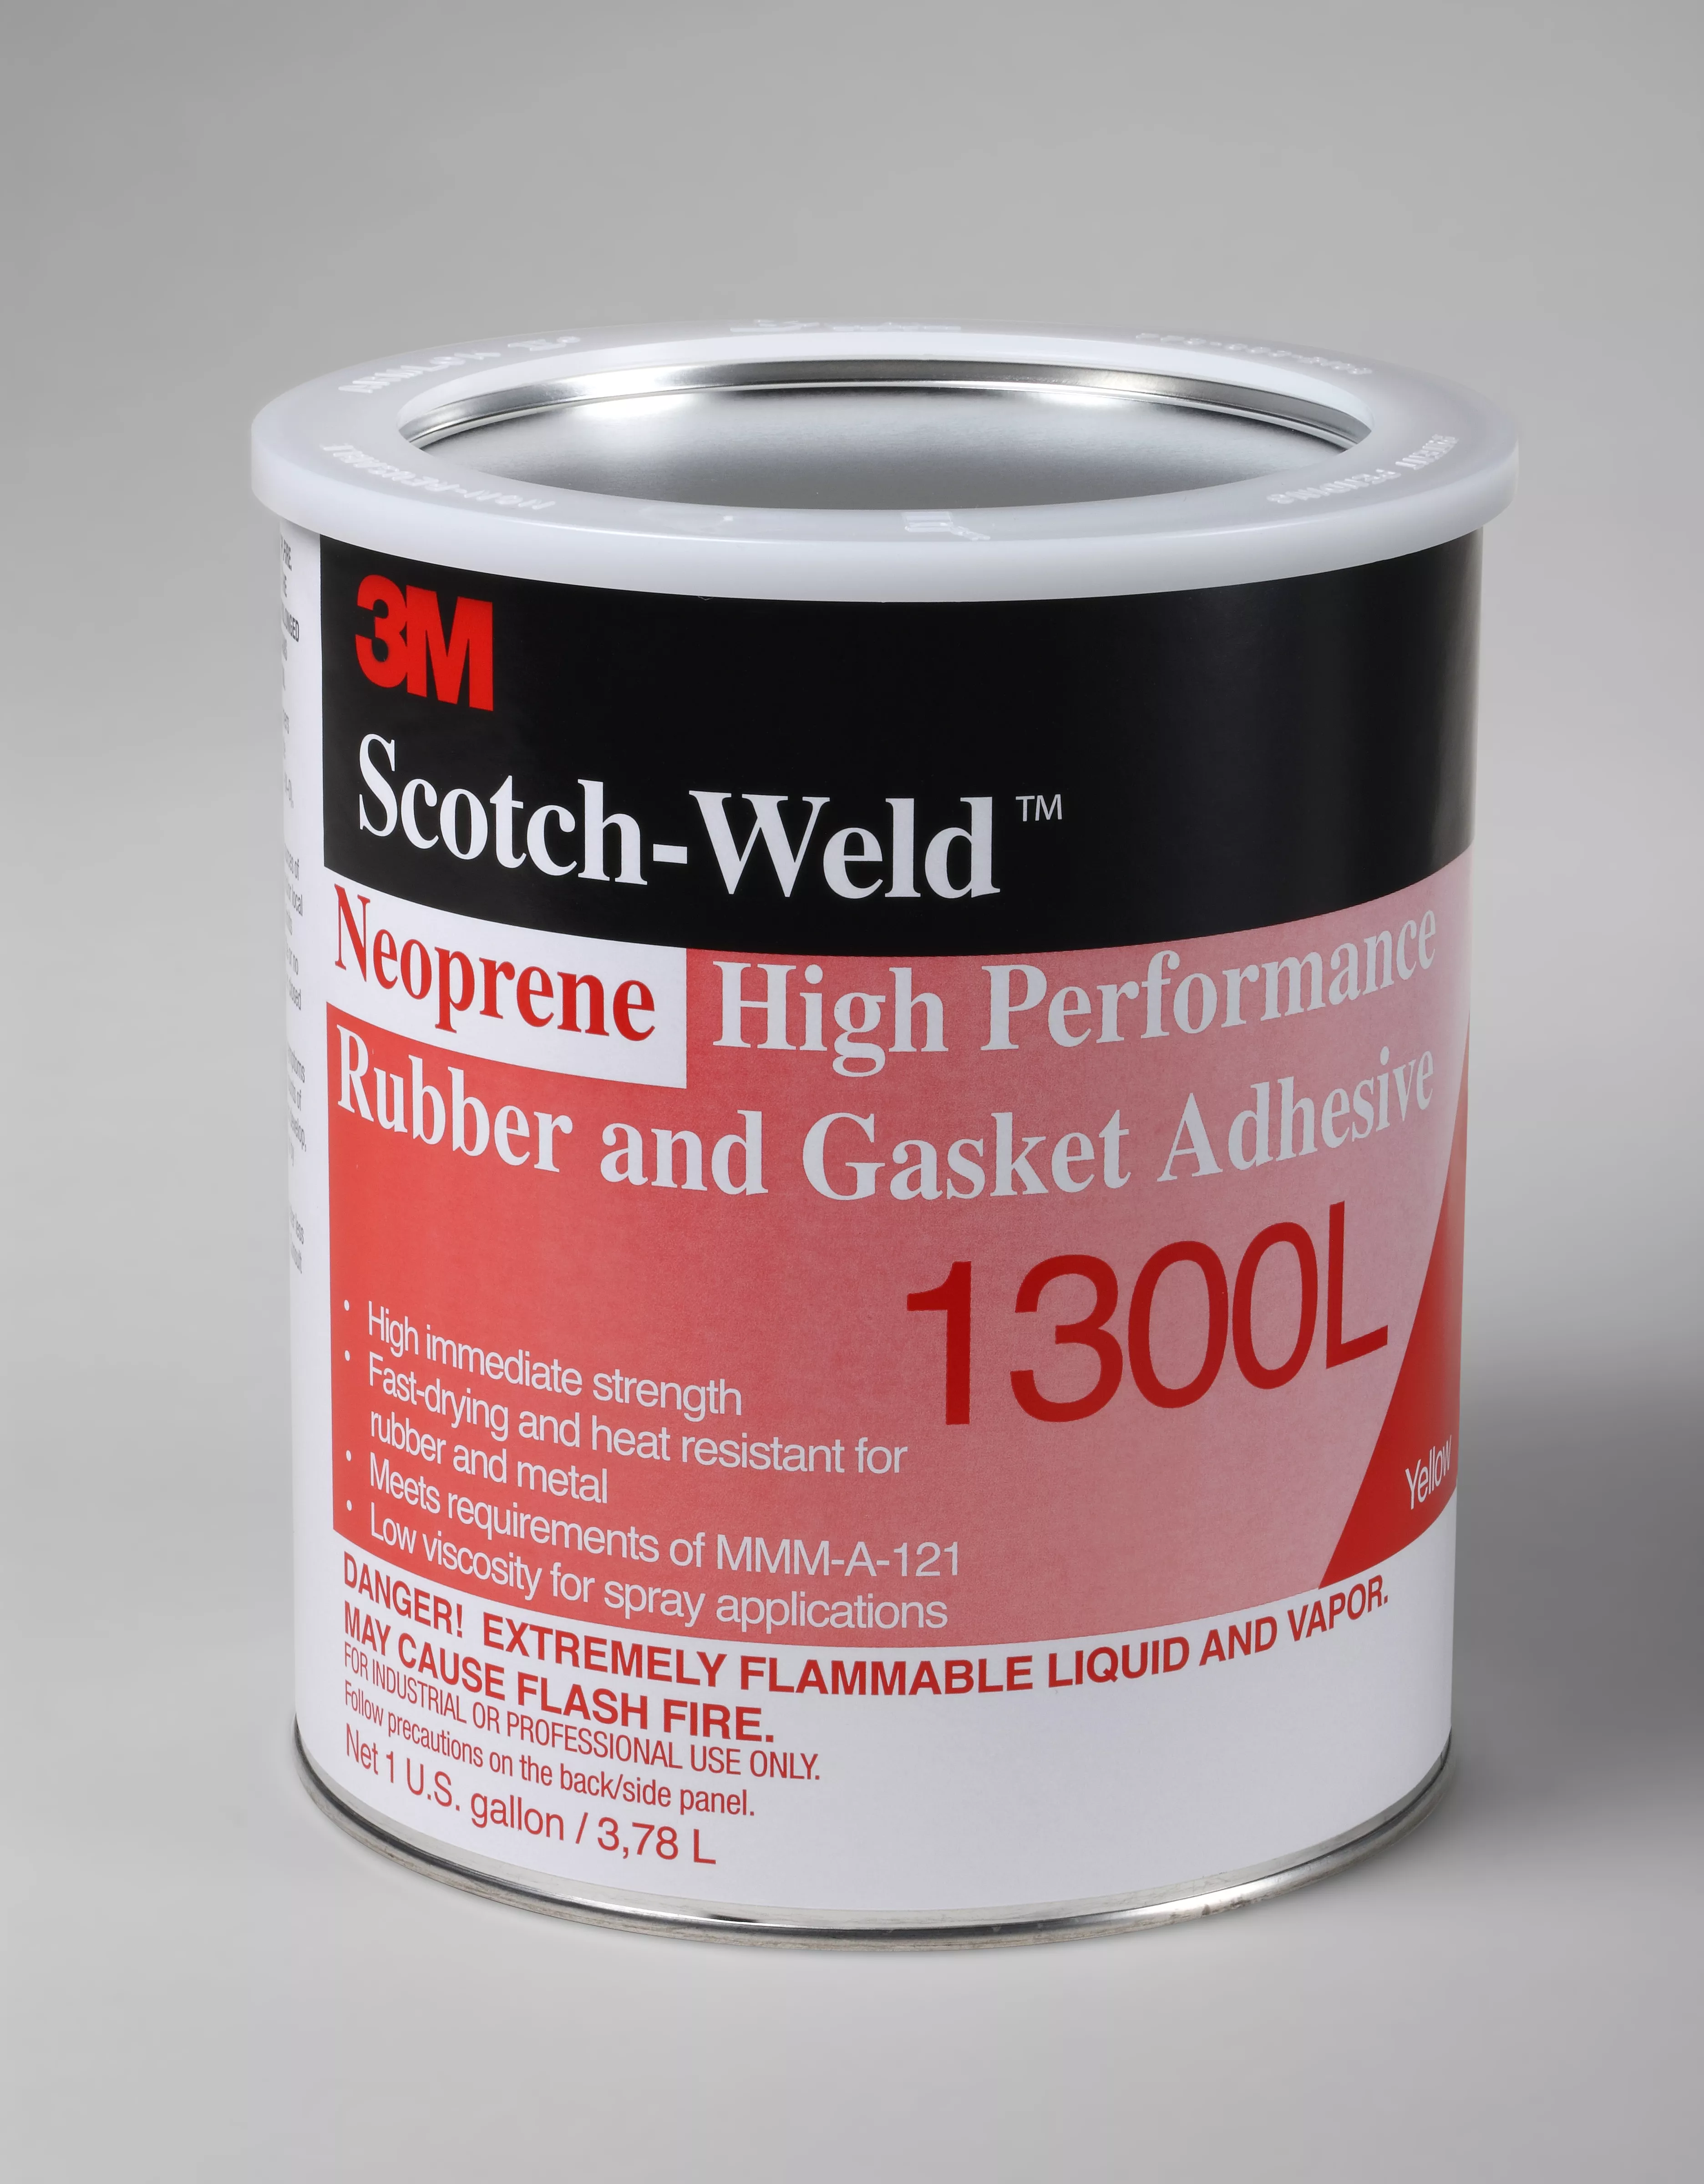 3M™ Neoprene High Performance Rubber and Gasket Adhesive 1300L, Yellow,
1 Gallon, 4 Can/Case